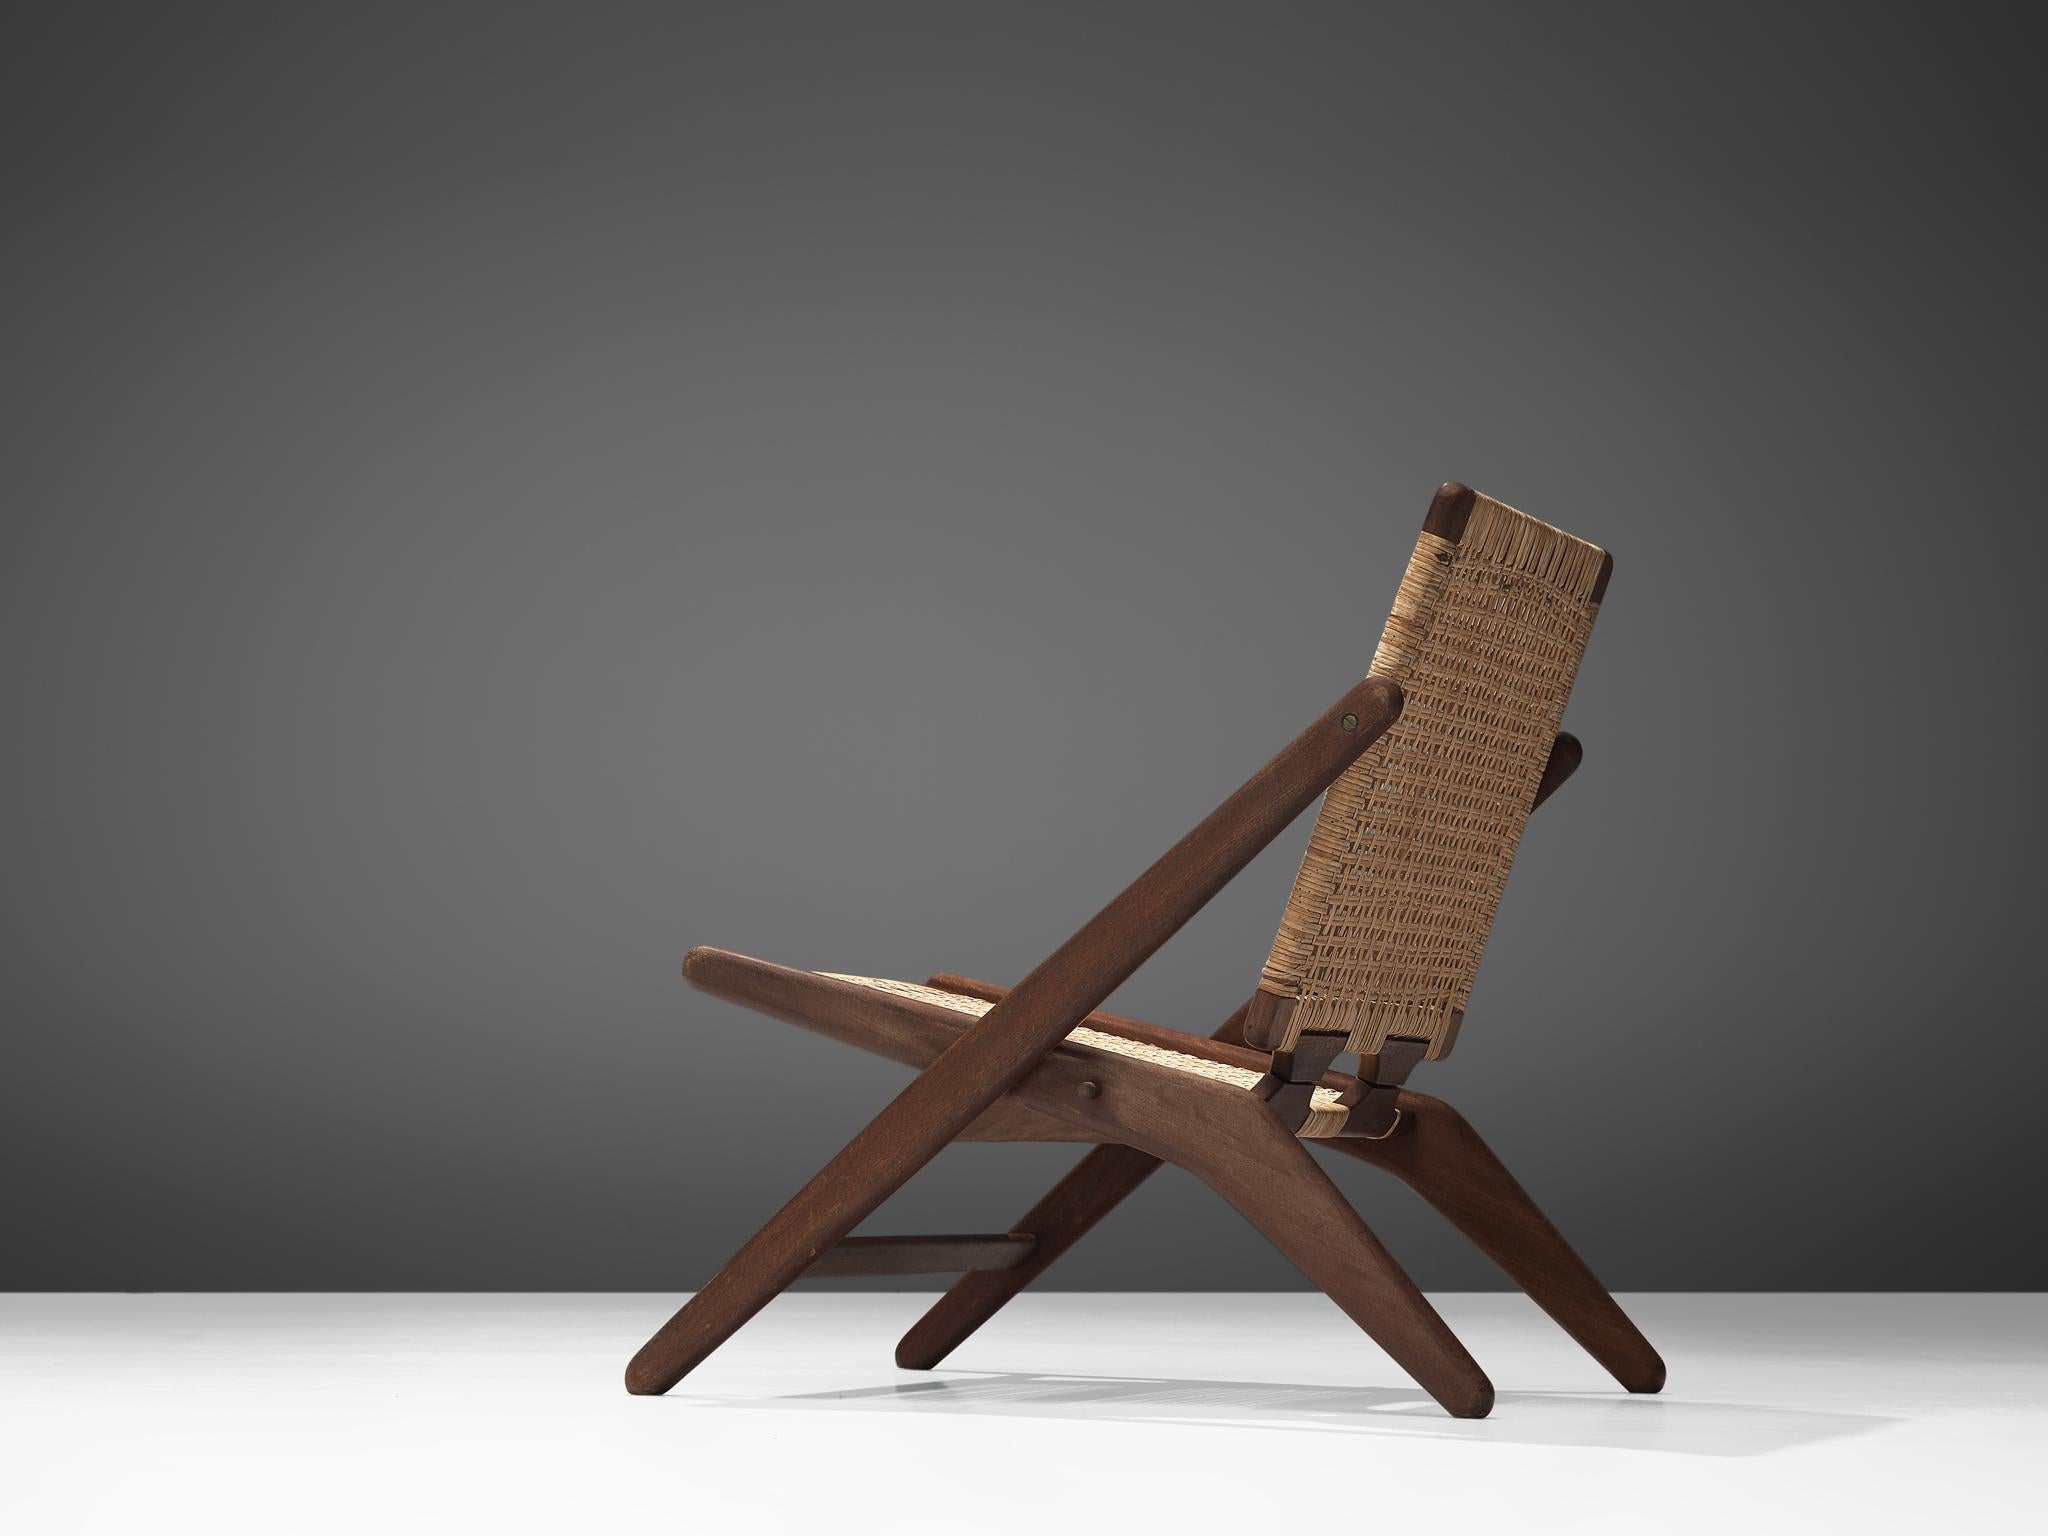 Mid-20th Century Danish Easy Chair in Wood and Wicker by Arne Hovmand-Olsen